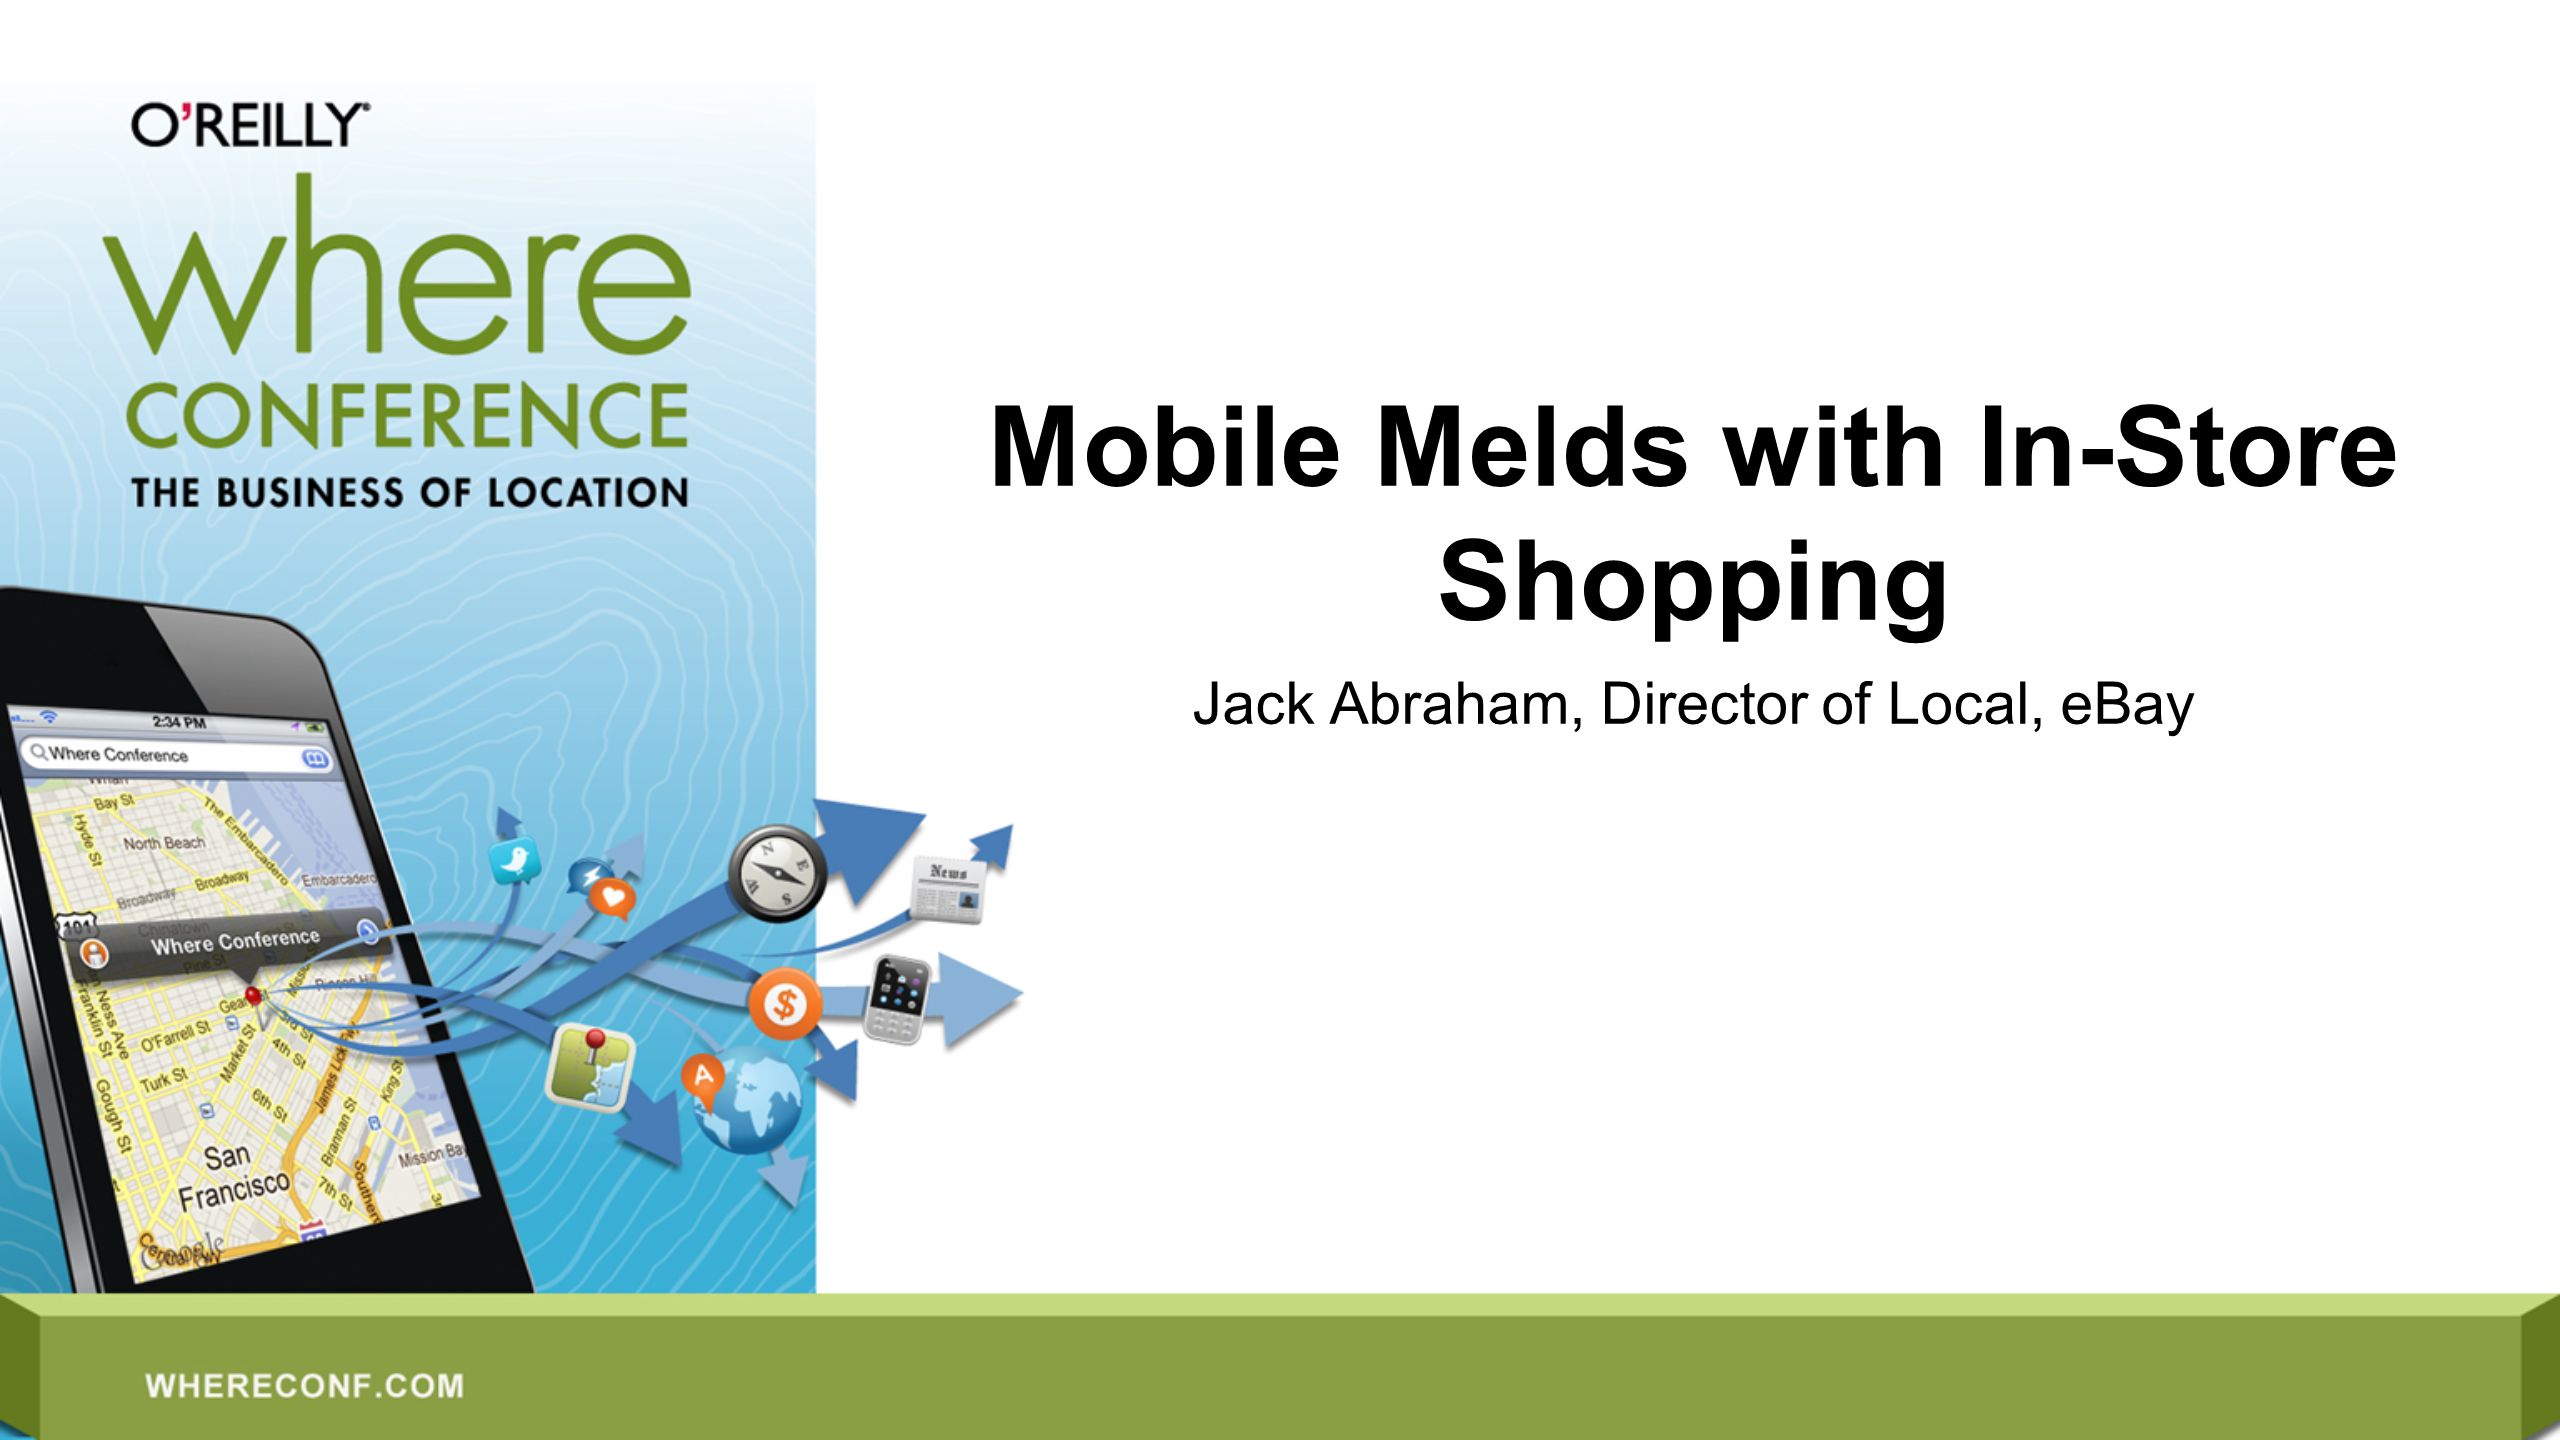 Mobile Melds with In-Store Shopping Jack Abraham, Director of Local, eBay